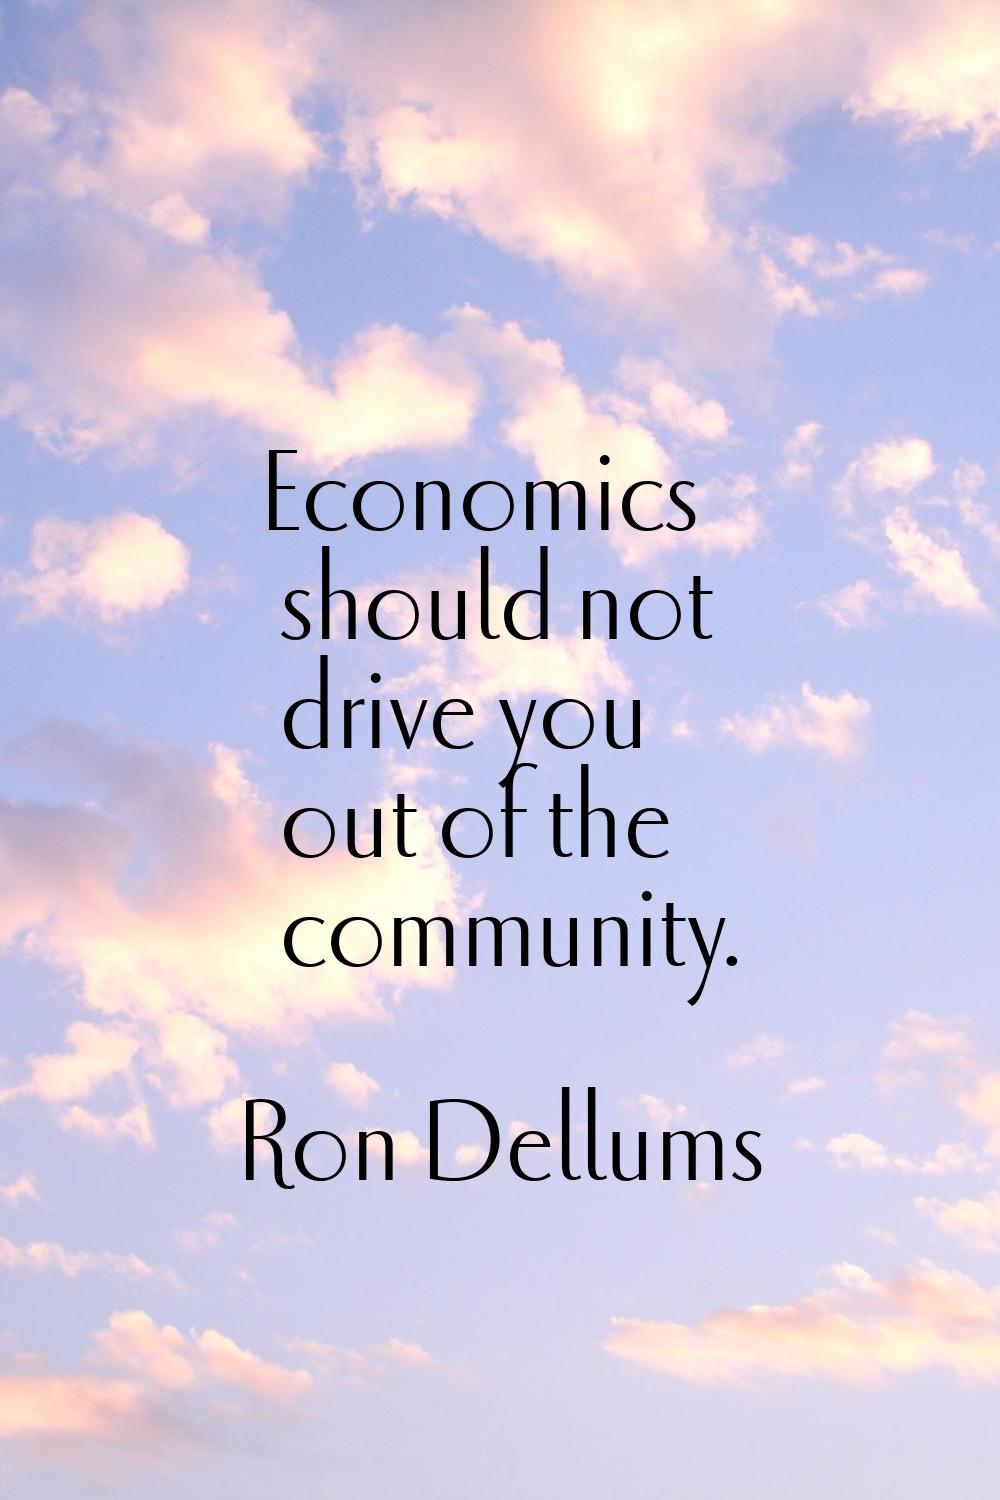 Economics should not drive you out of the community.